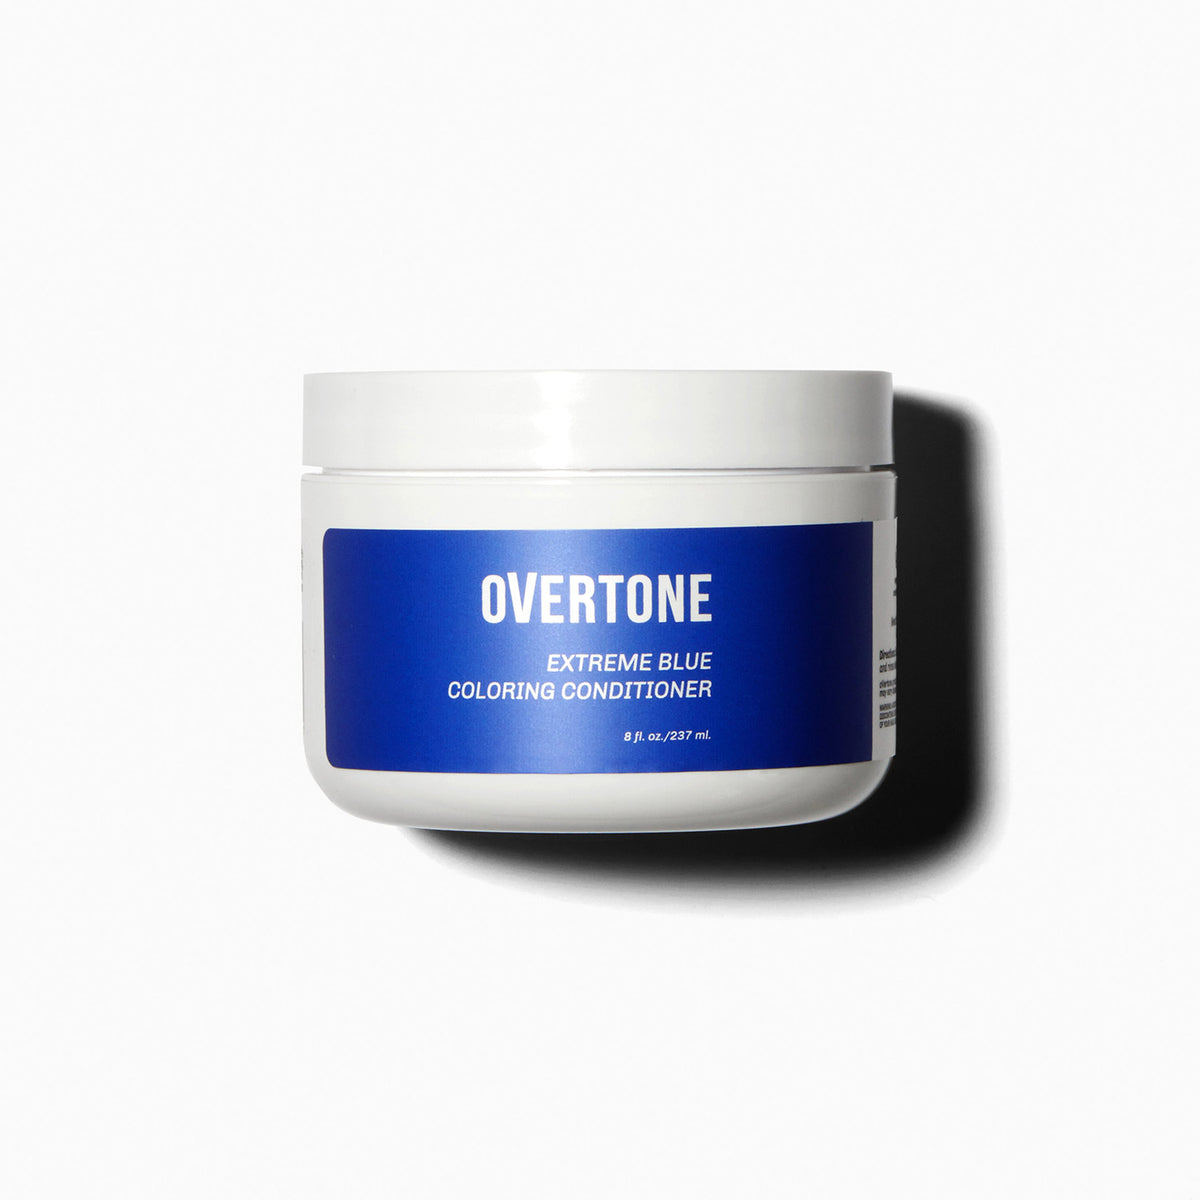 oVertone Extreme Blue Hair Coloring Conditioner